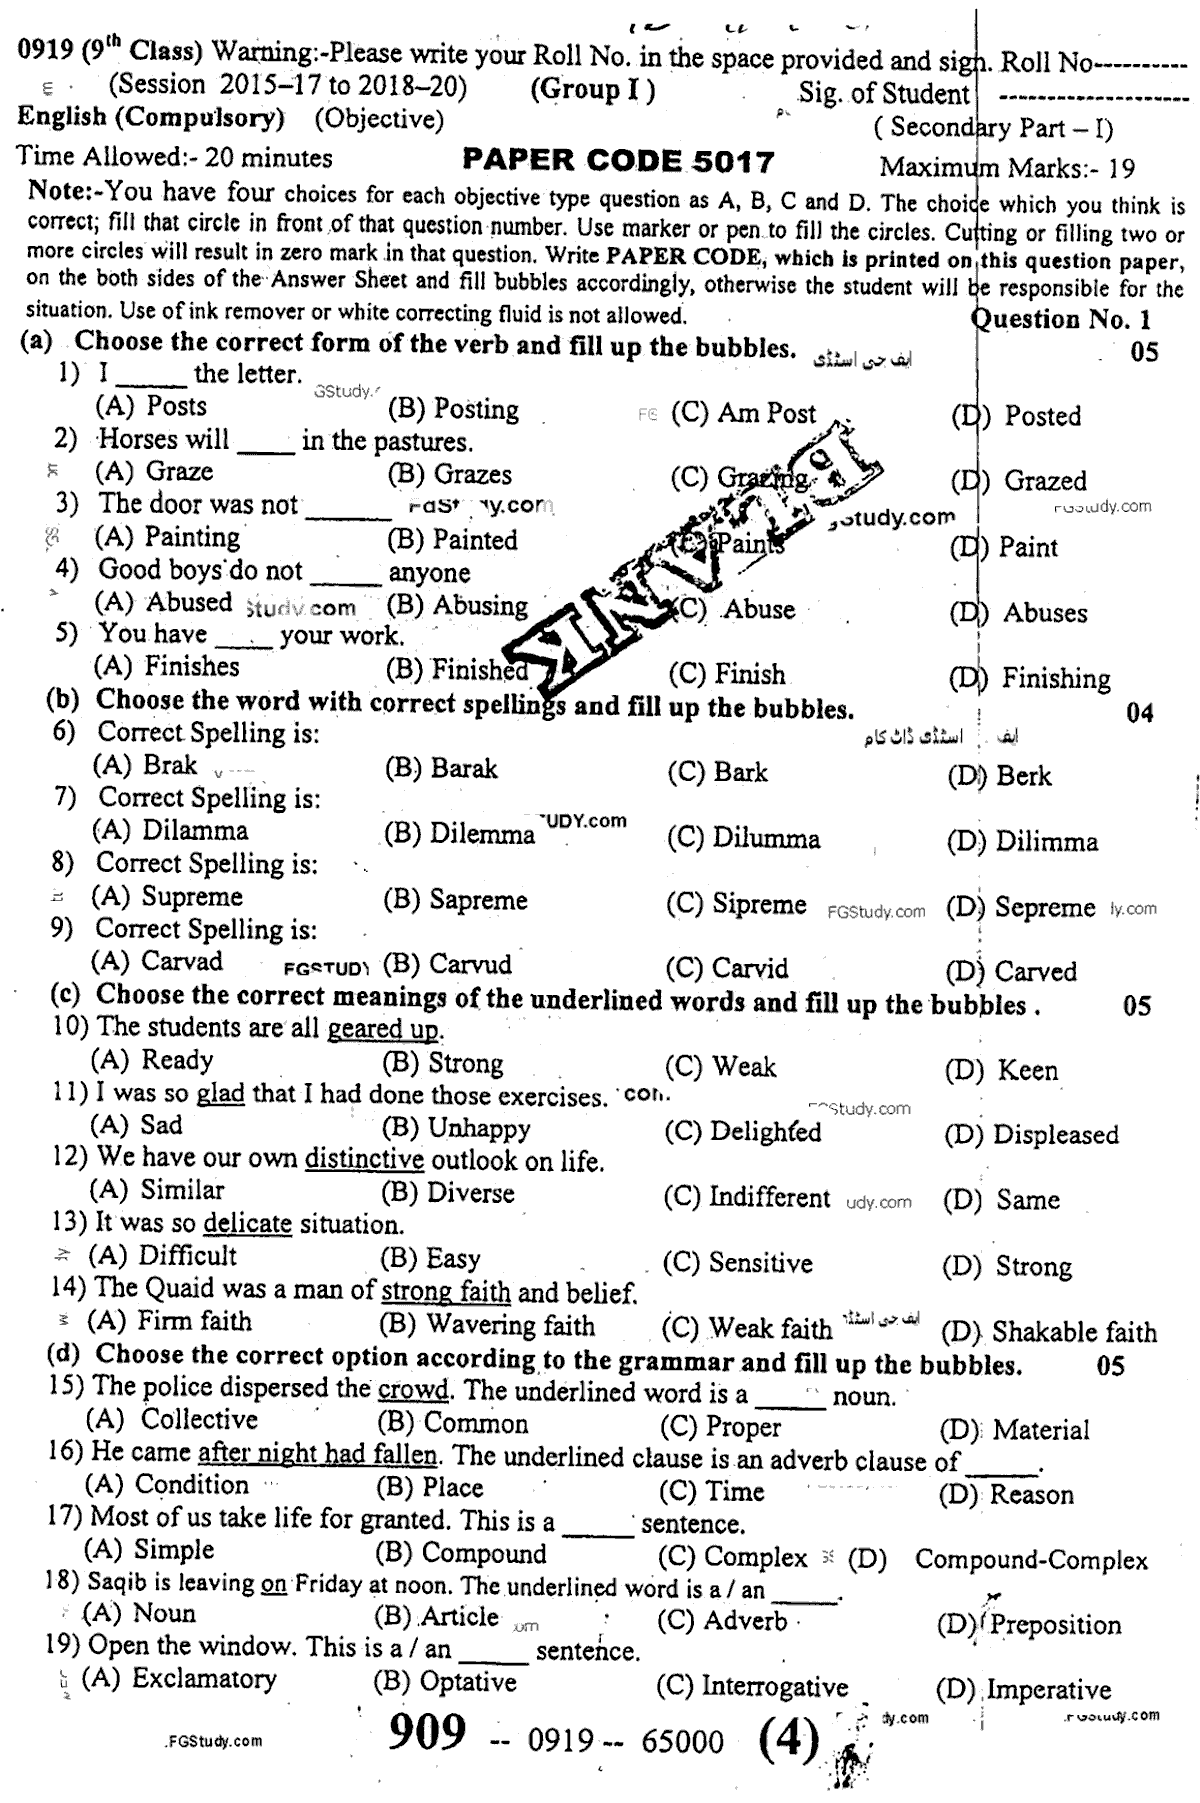 9th Class English Past Paper 2019 Group 1 Objective Sargodha Board